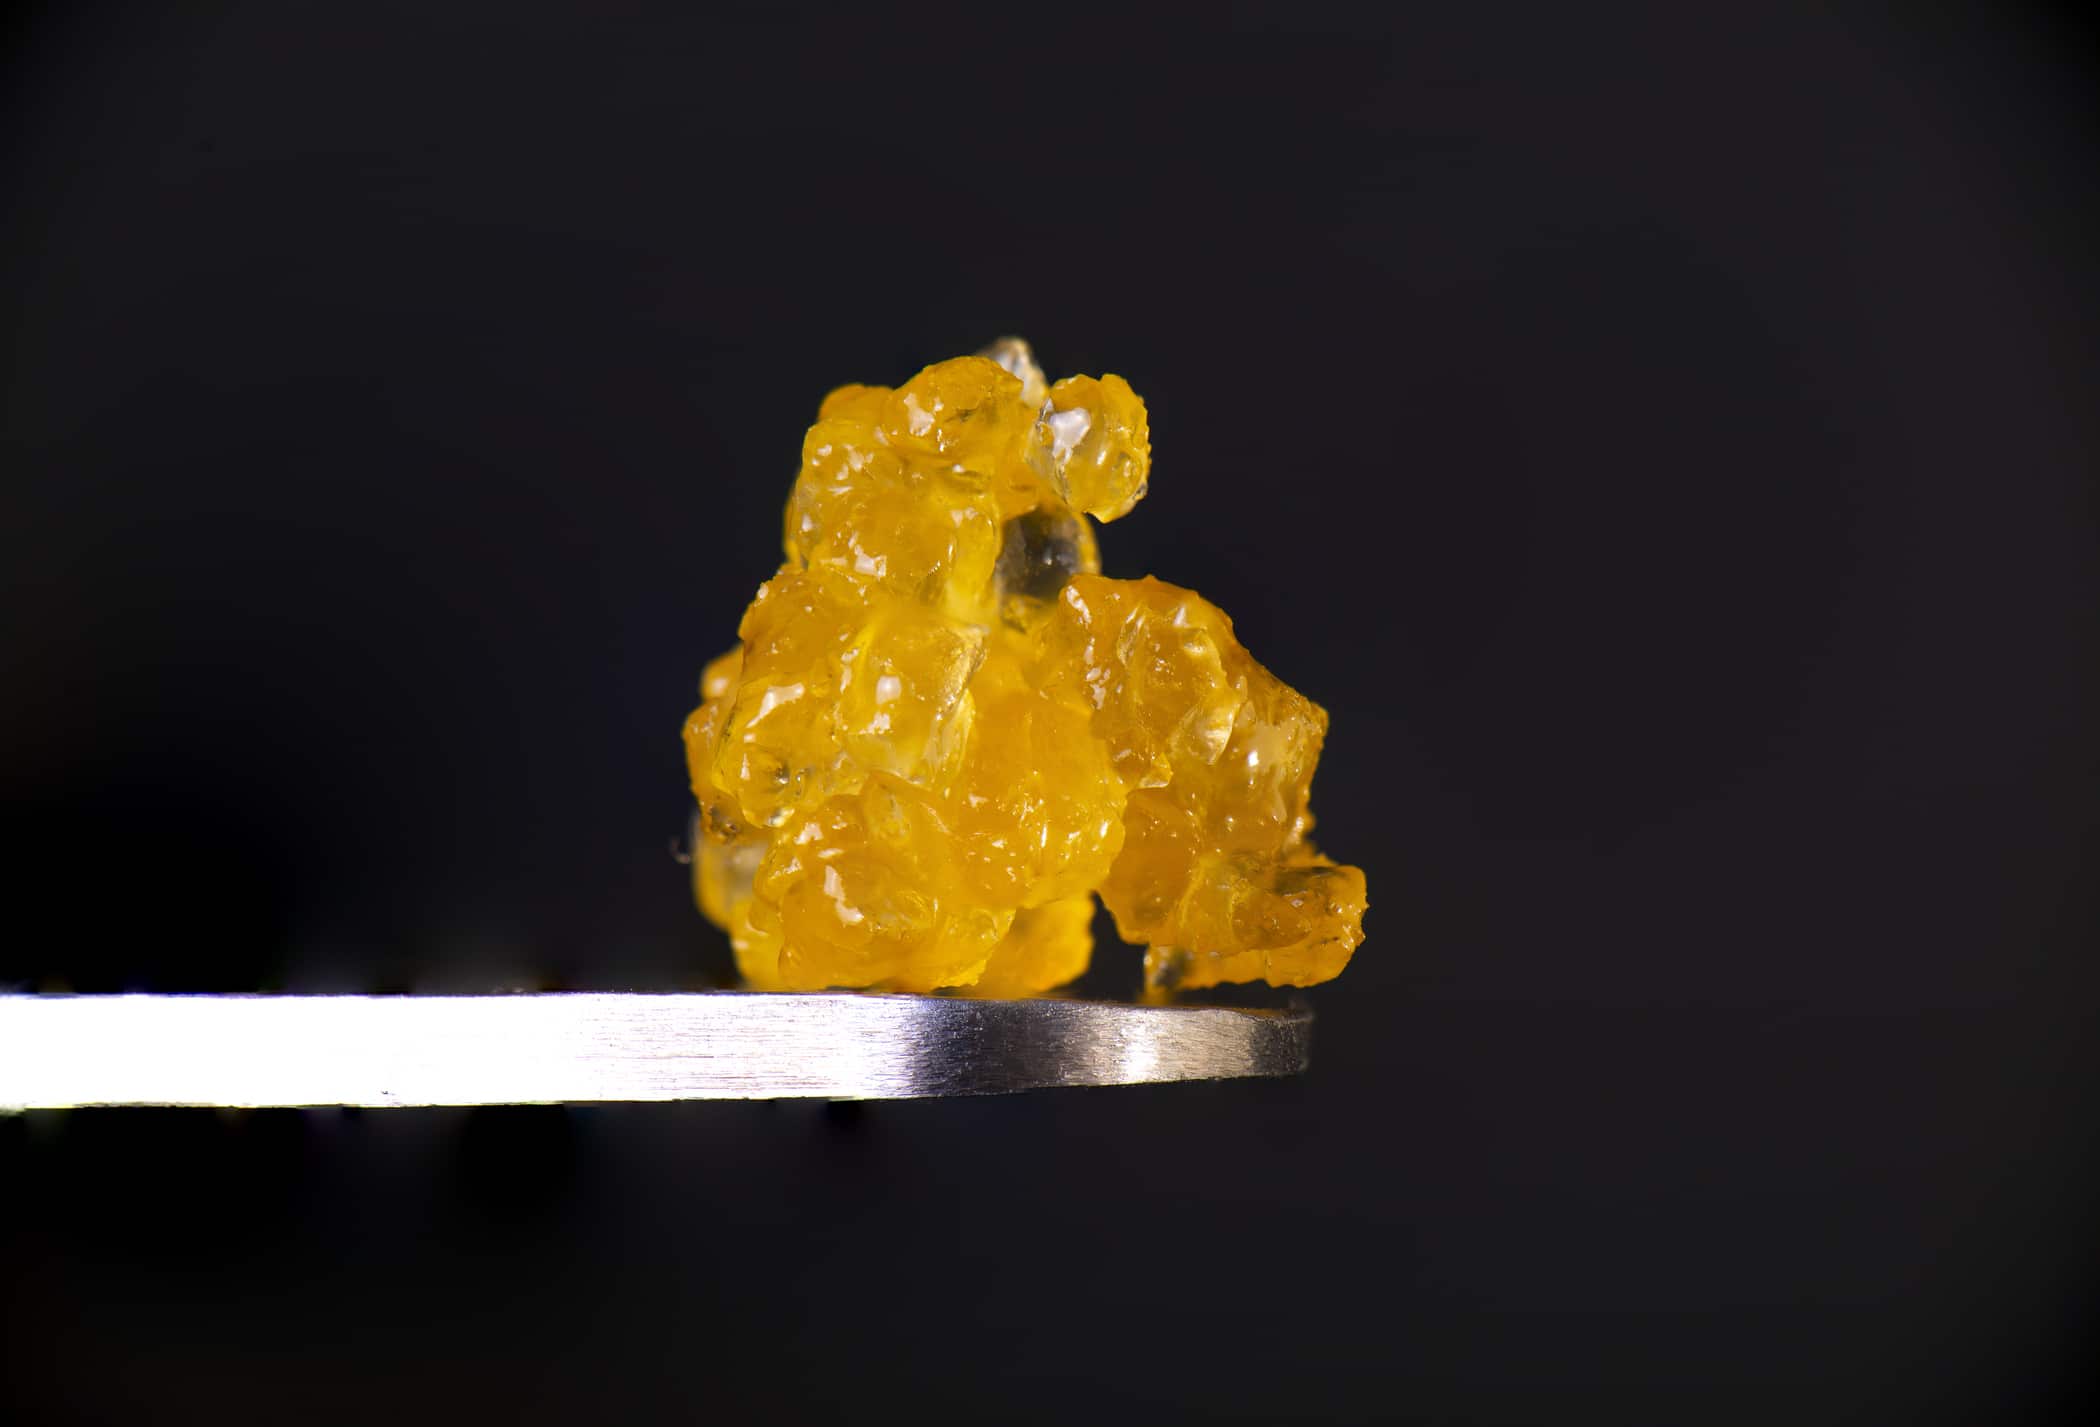 Macro detail of cannabis concentrate HTFSE extracted from medical marijuana